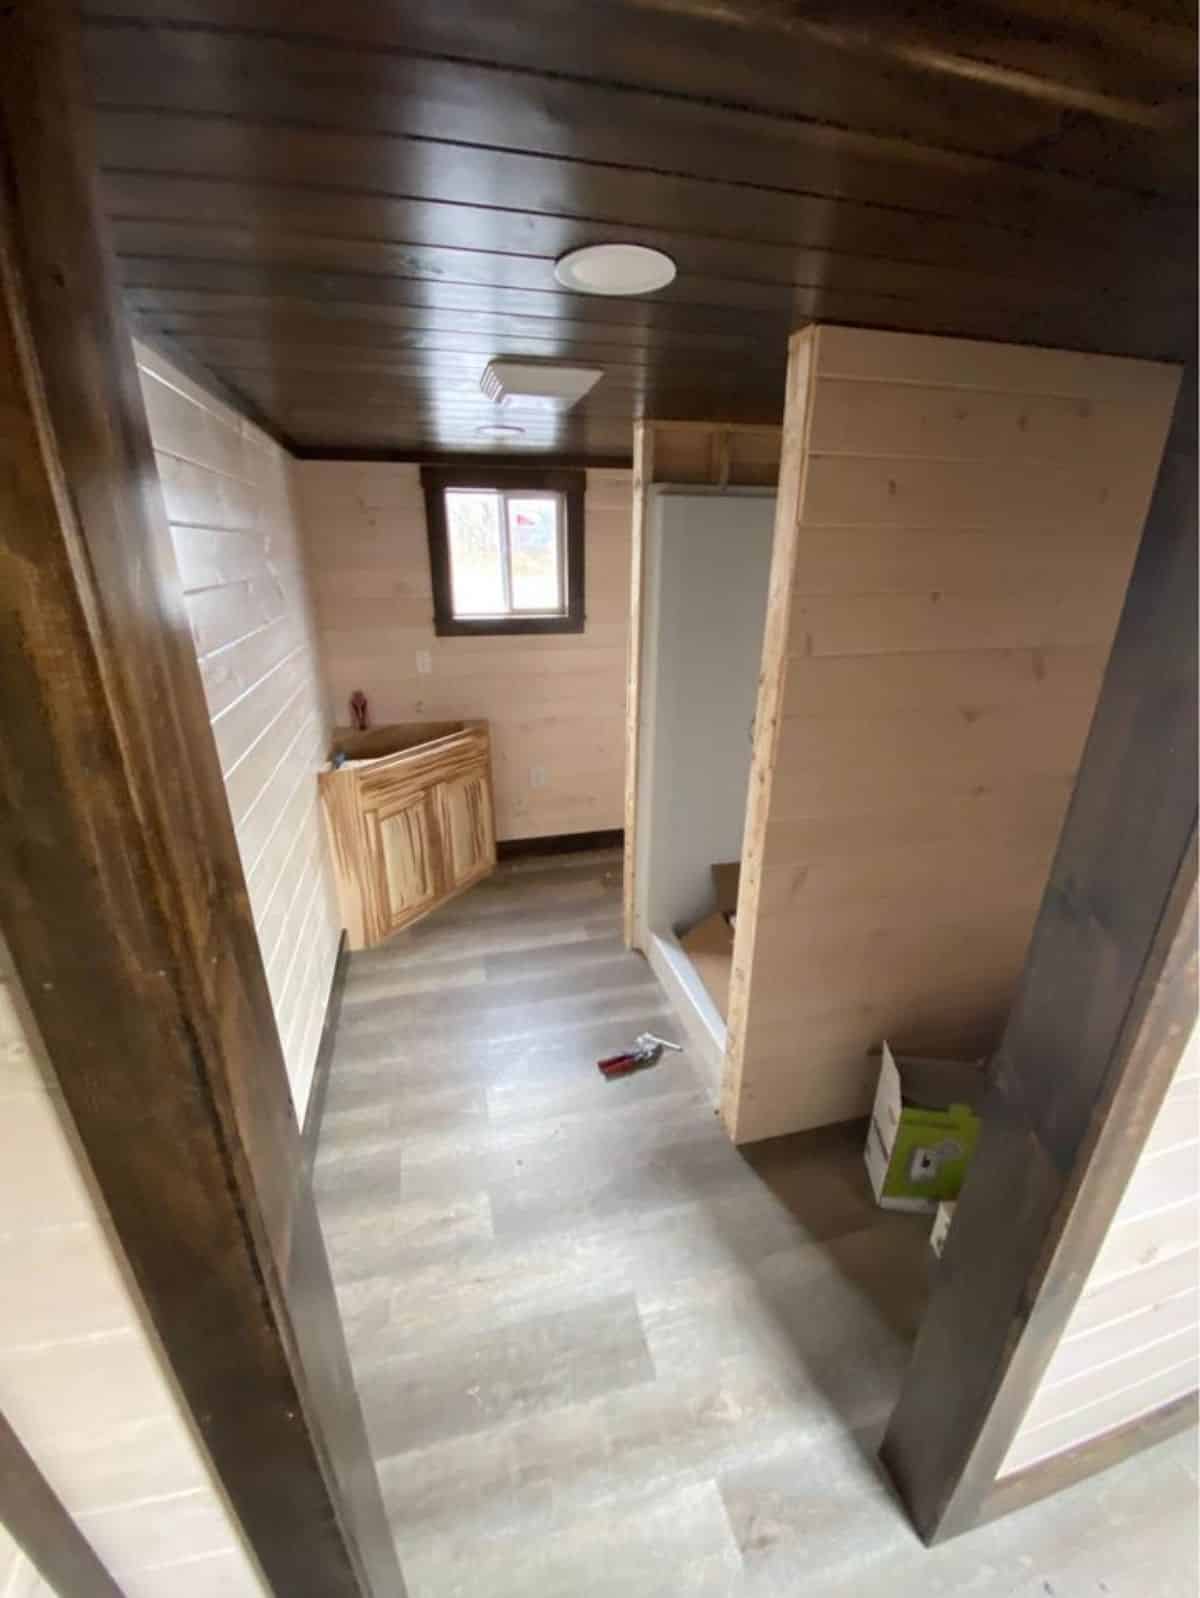 Bathroom of Custom Built Tiny Home has all the fittings plus walkout space